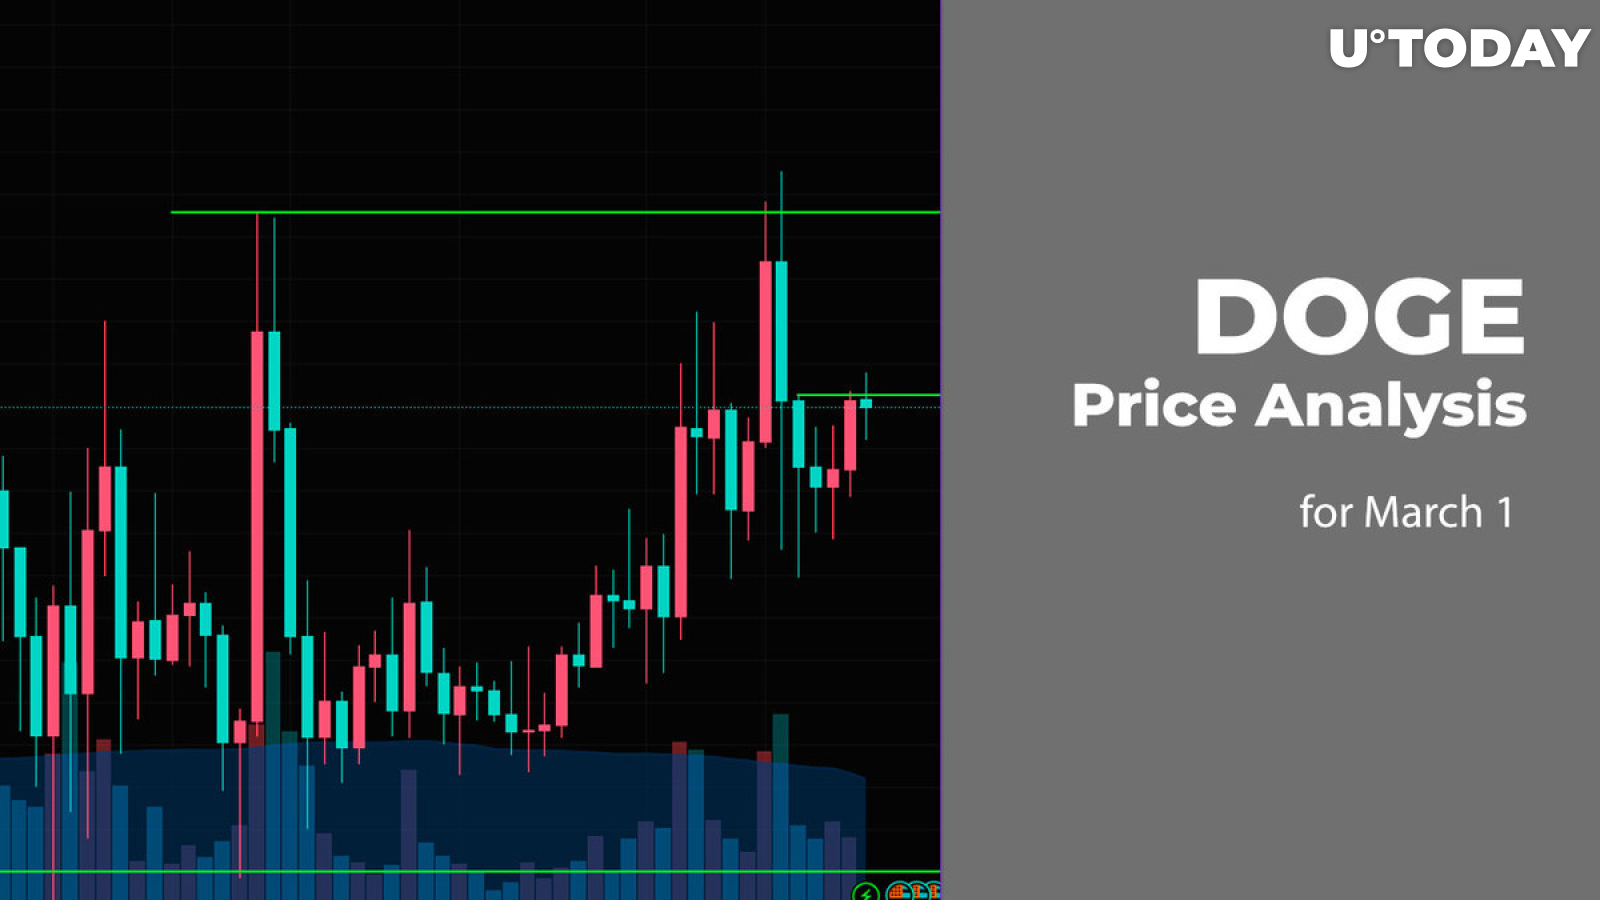 DOGE Price Prediction for March 1